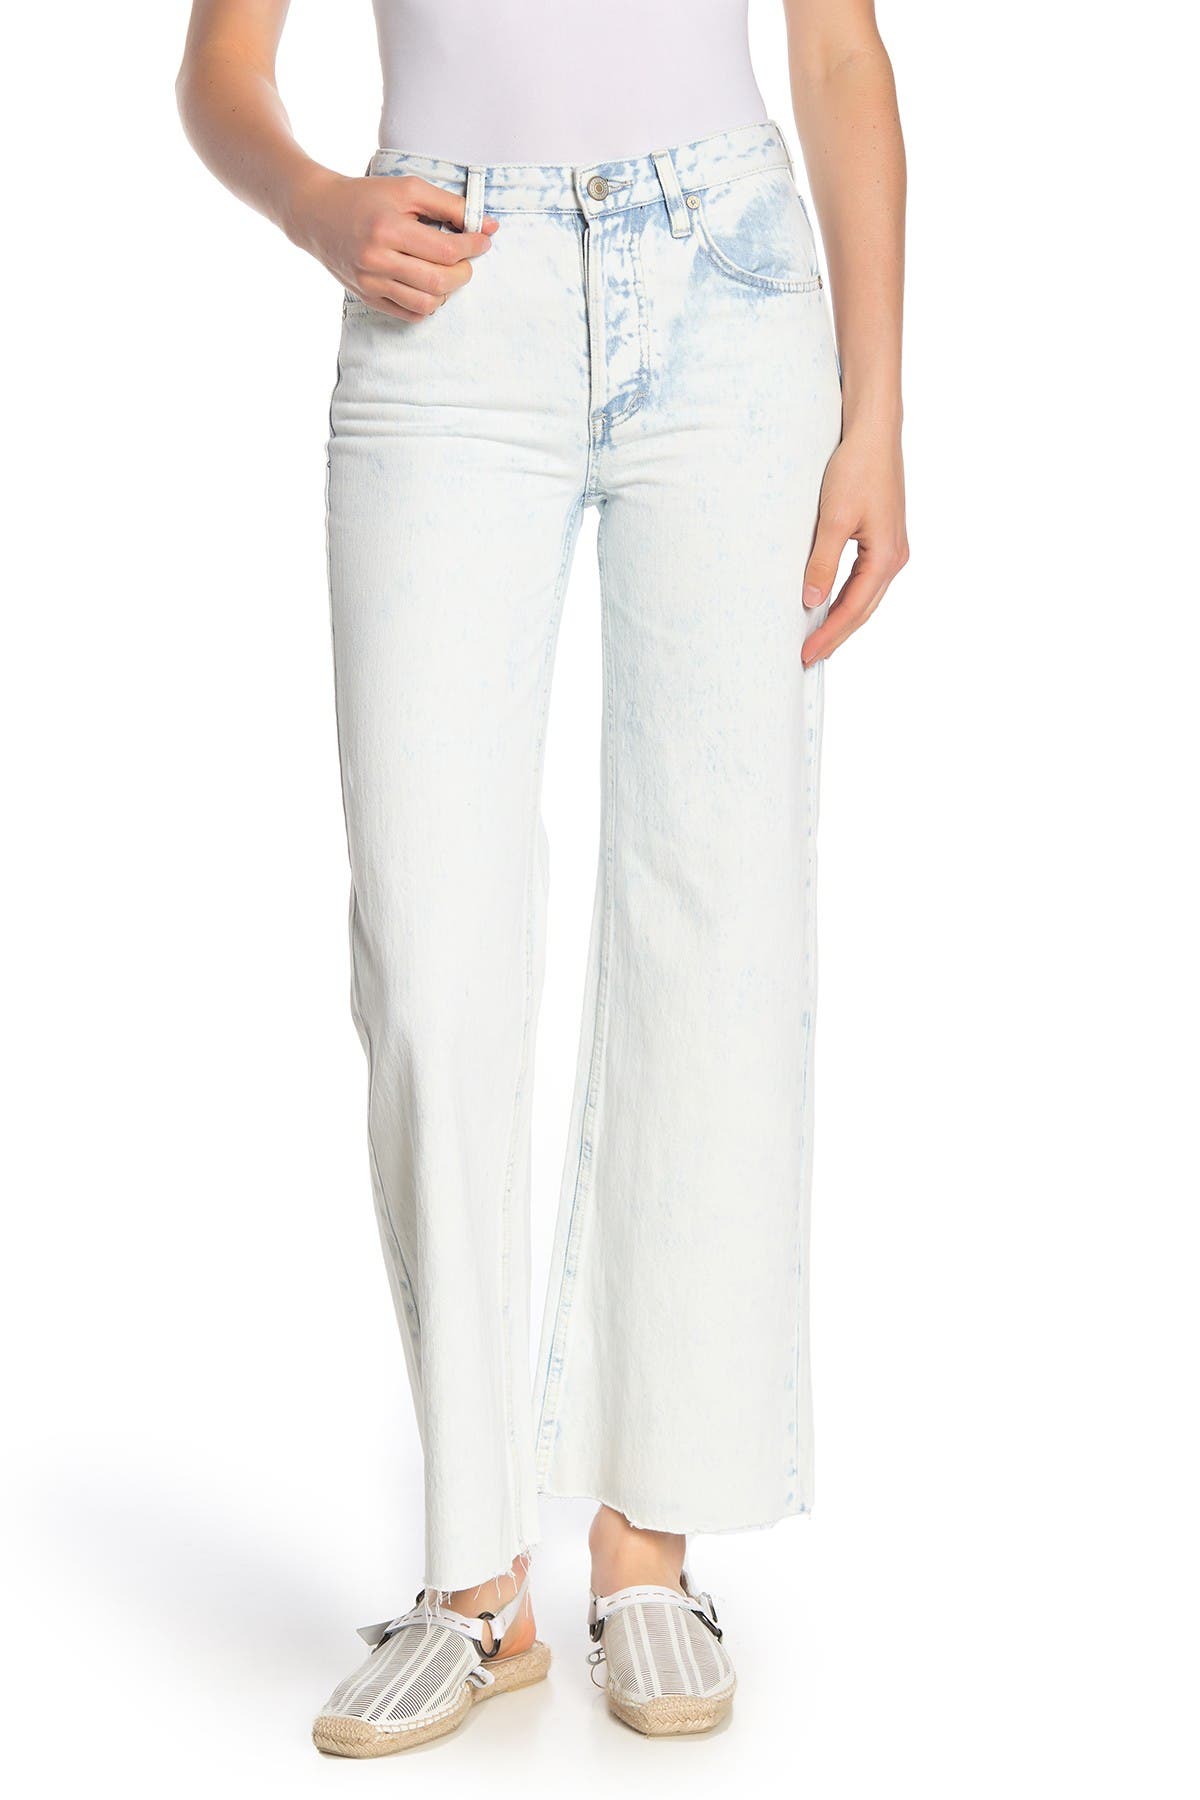 free people high rise straight flare jeans